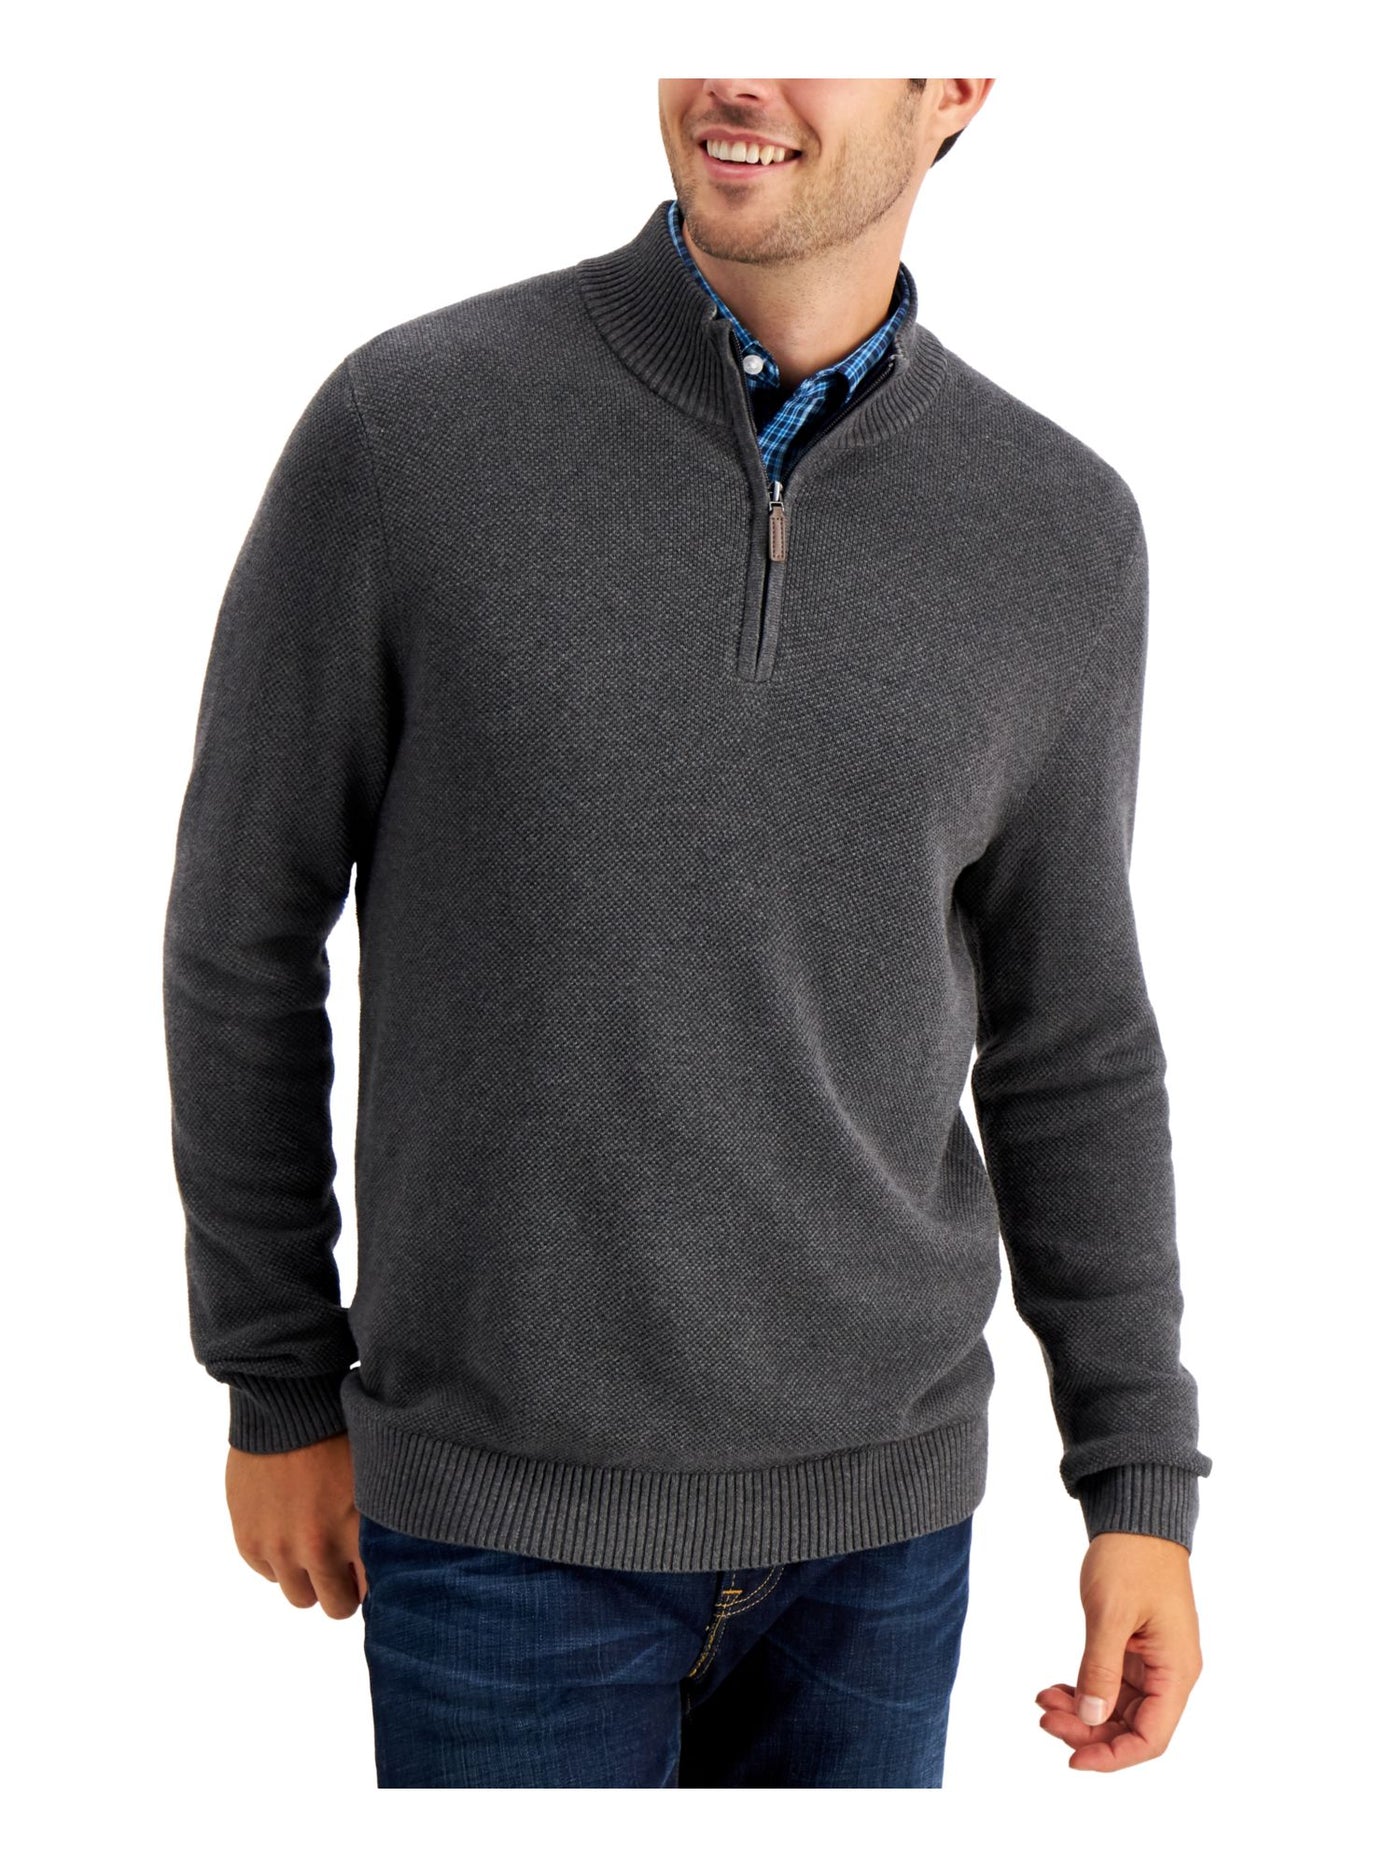 CLUBROOM Mens Gray Stand Collar Classic Fit Quarter-Zip Pullover Sweater S